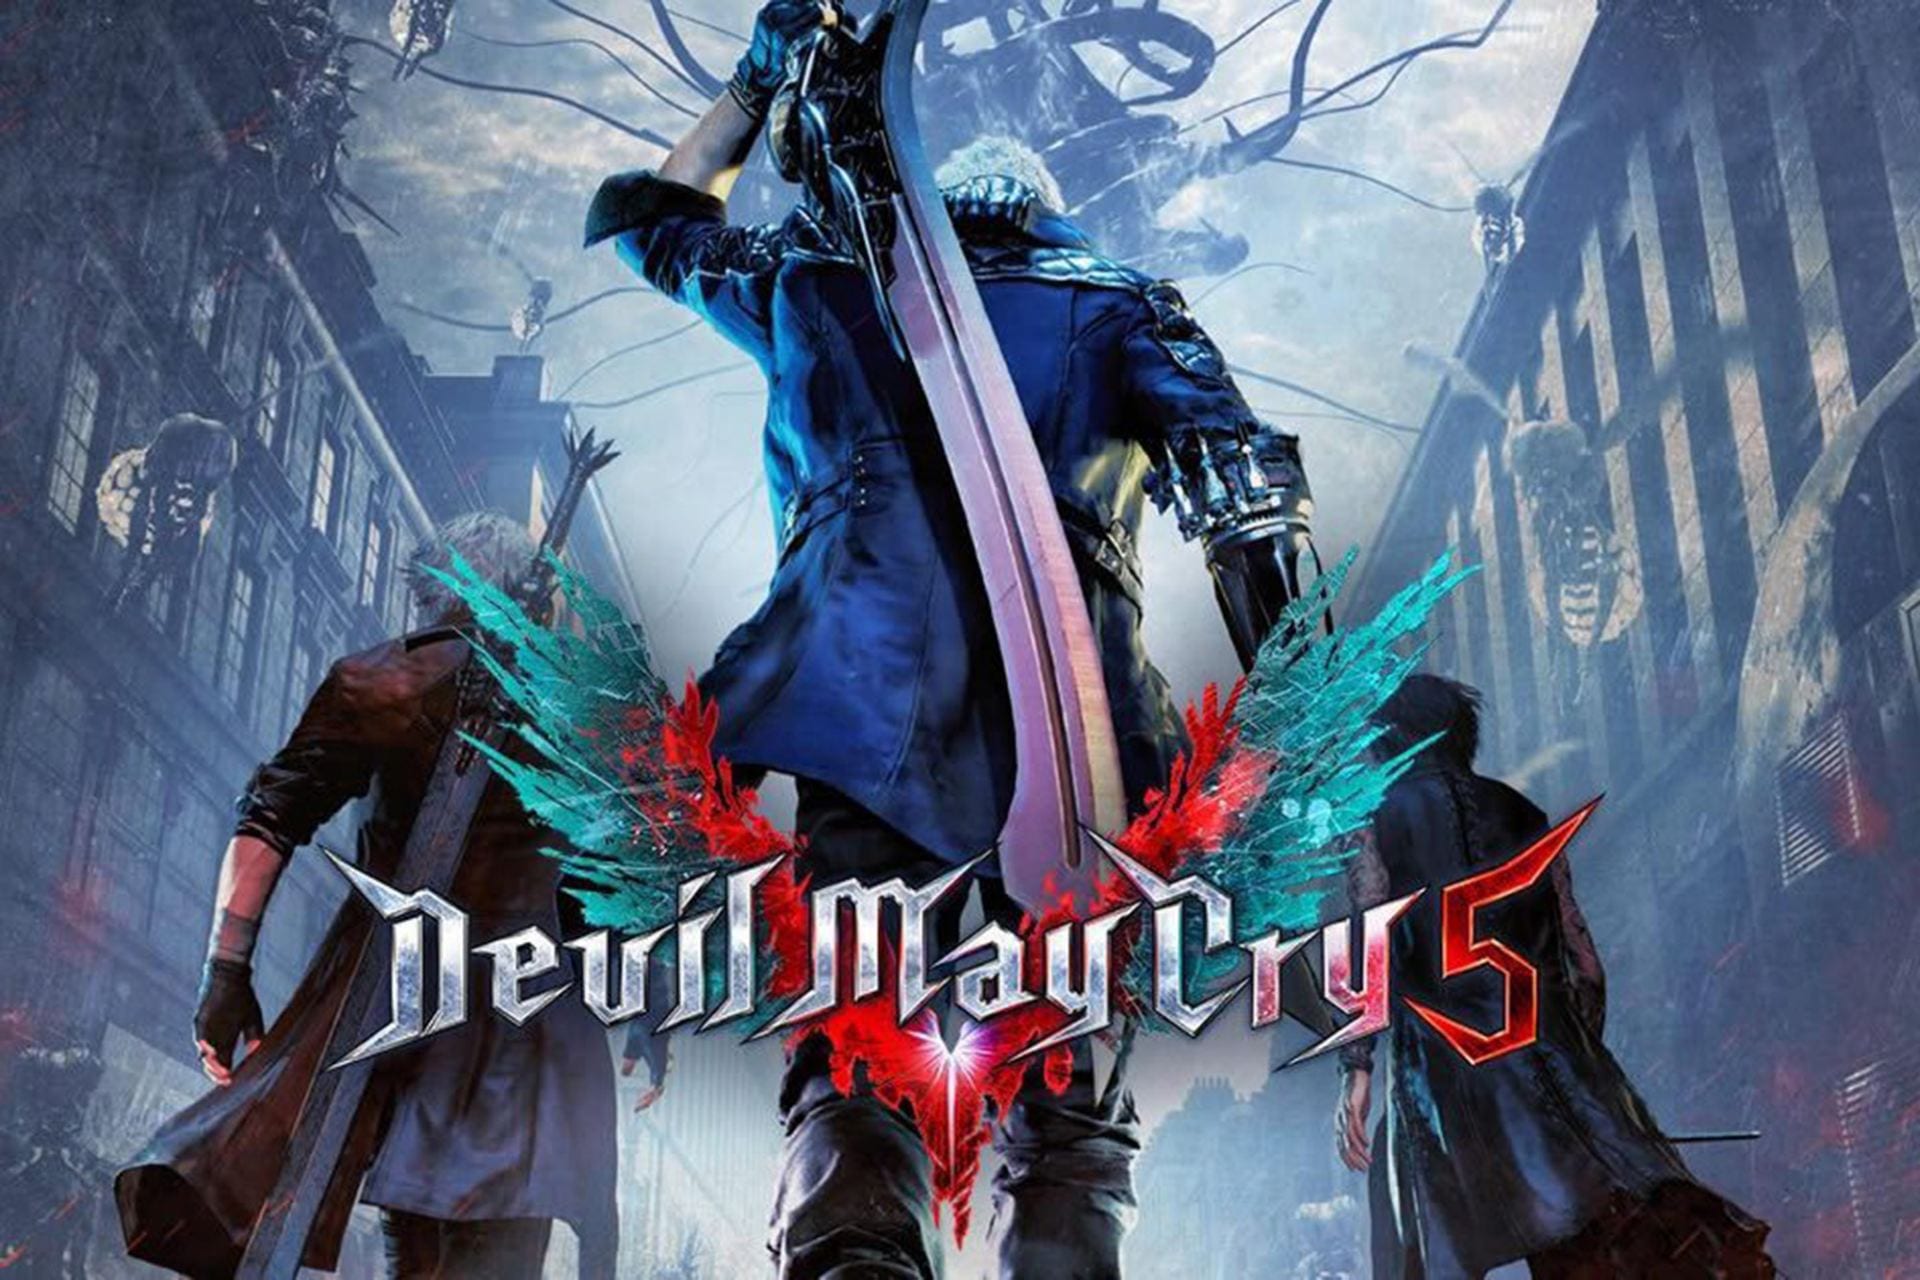 Devil May Cry 5 Special Edition Review - This Is Power